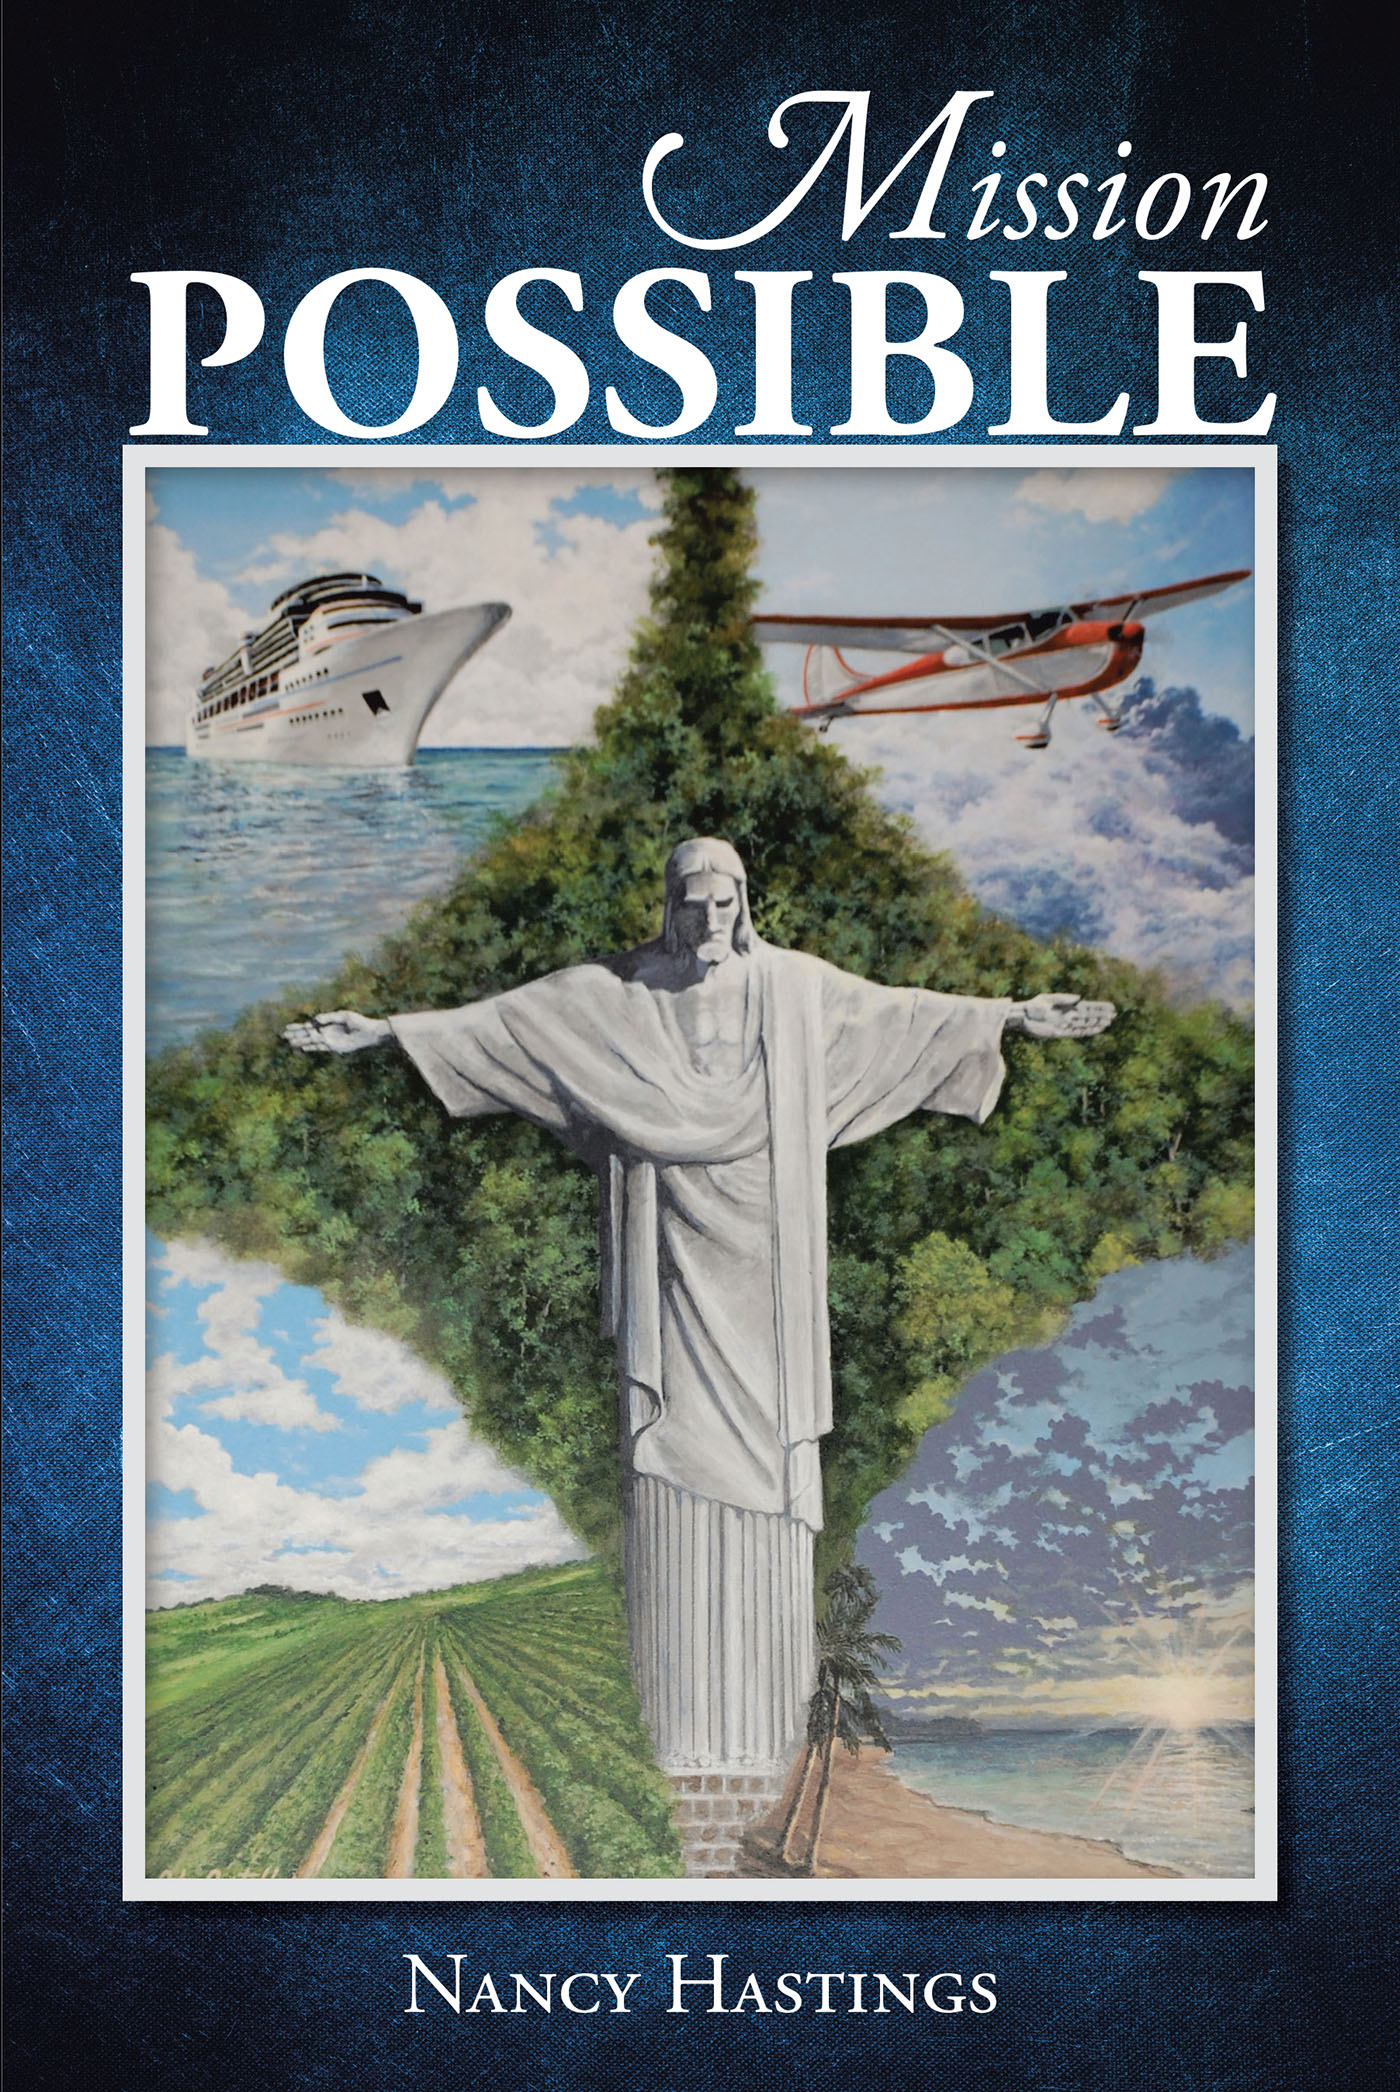 Nancy Hastings’s Newly Released "Mission Possible" is an Engaging Story of the Blessings and Challenges Discovered on a Fateful Mission Trip